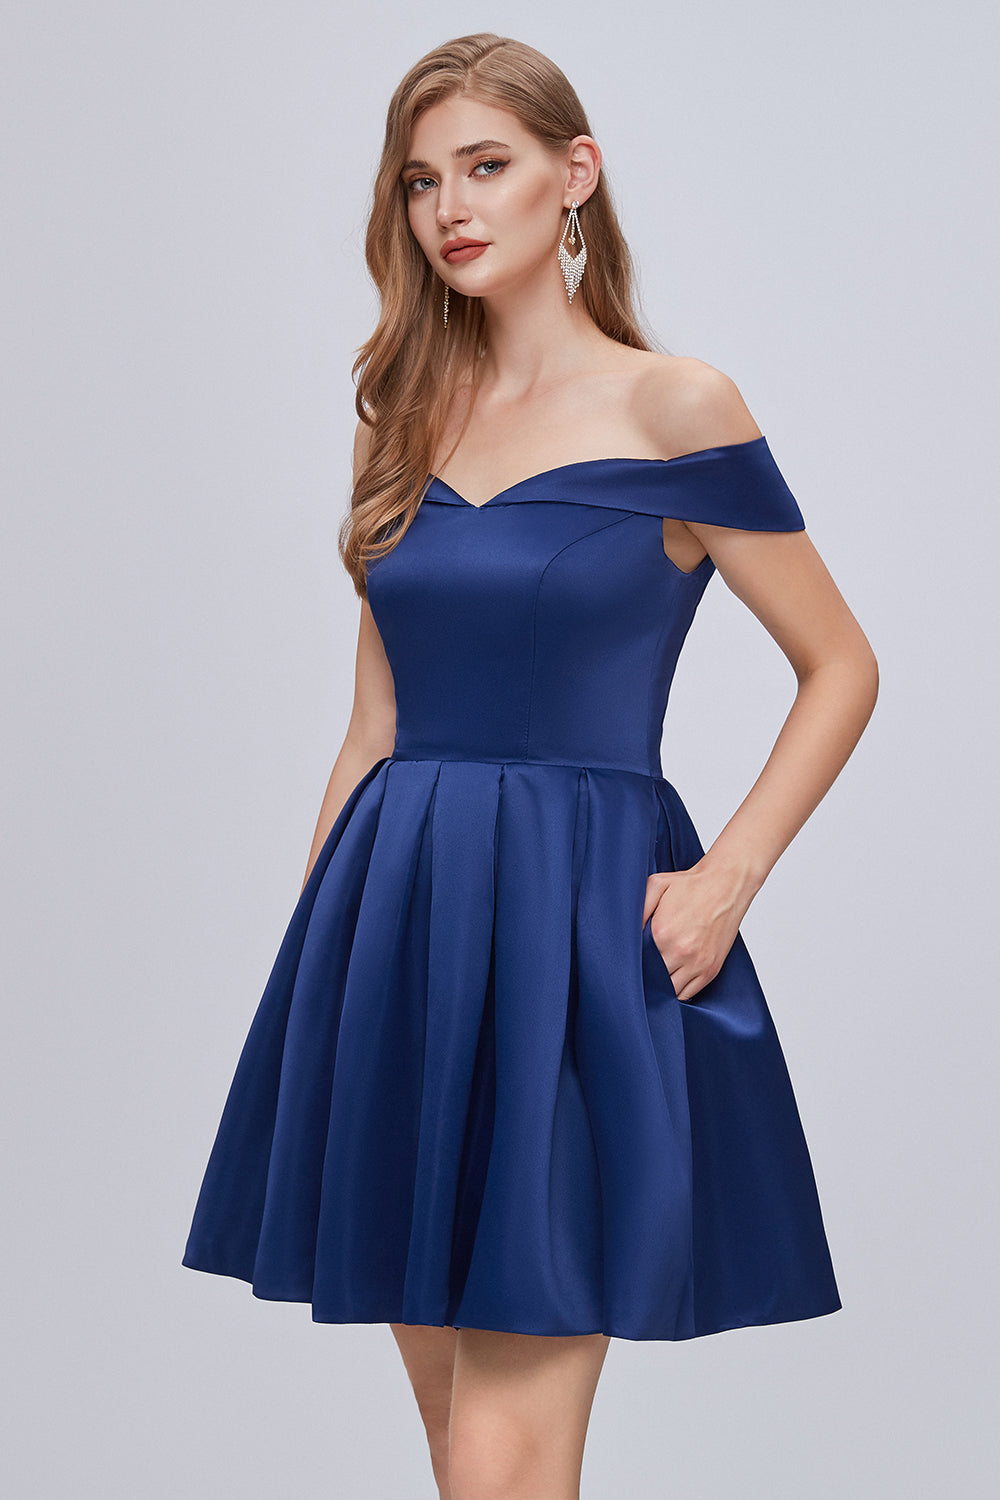 Cute Off The Shoulder Lace Up Satin Homecoming Dresses